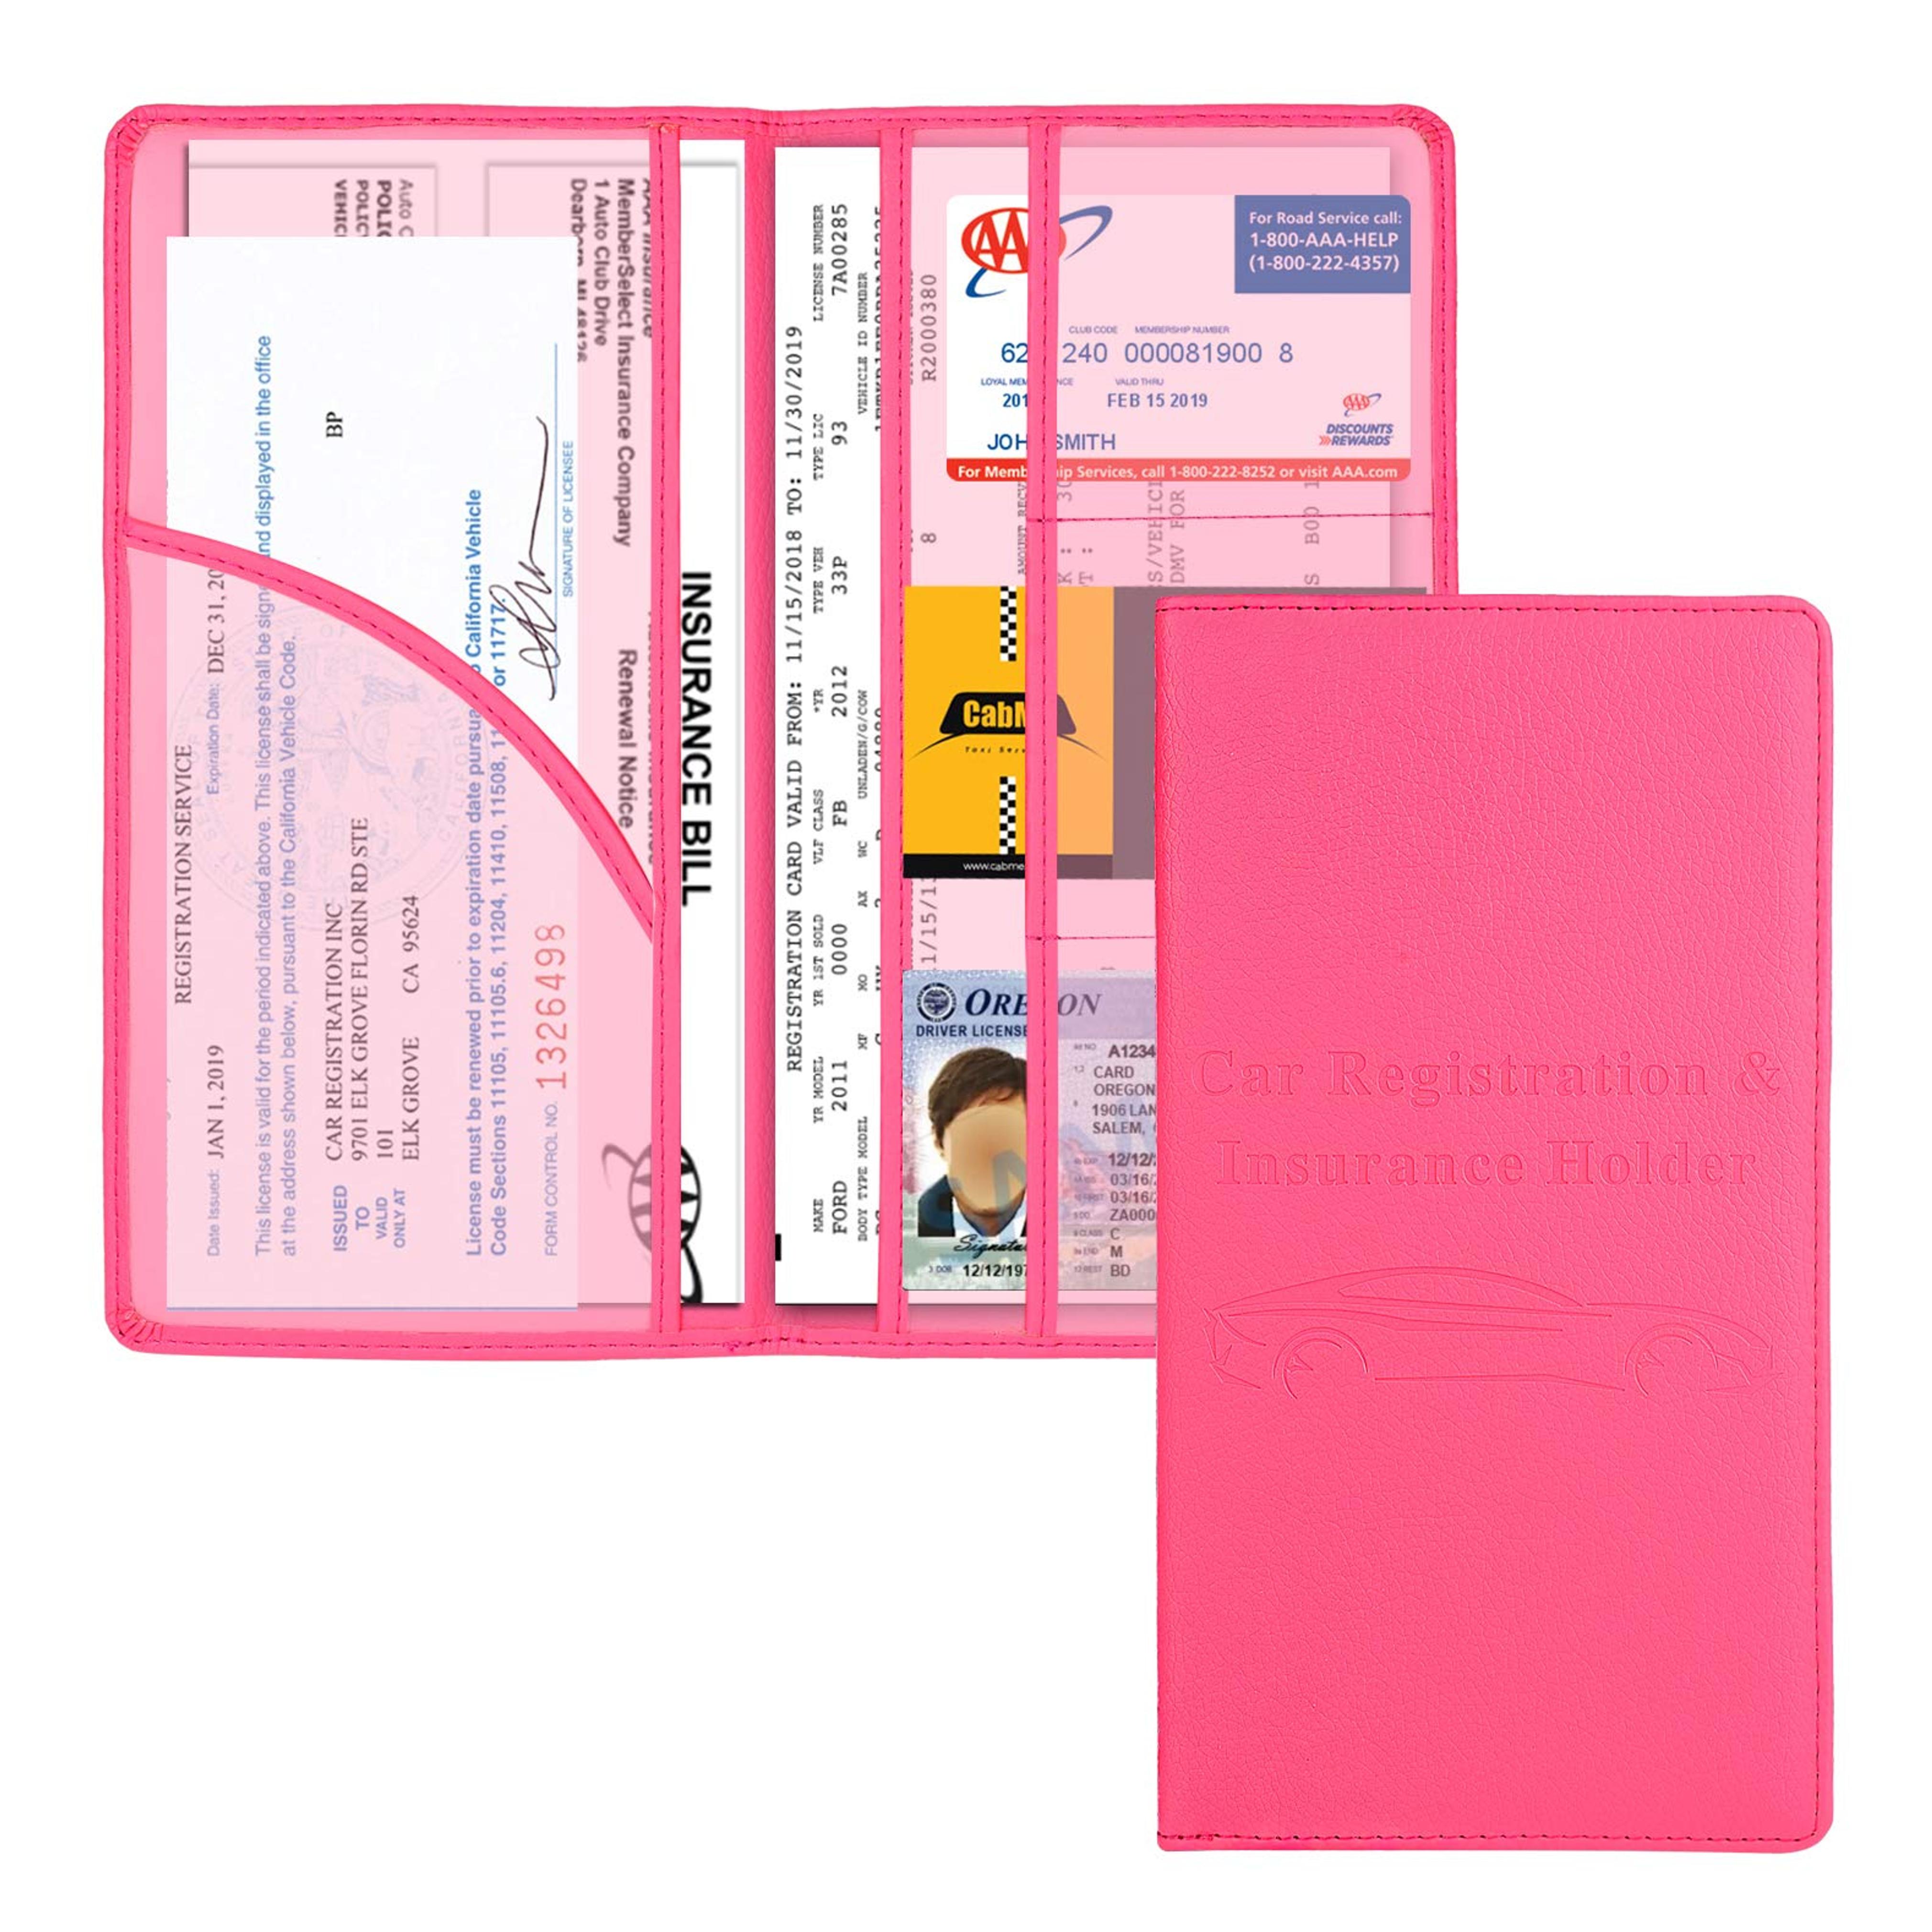 Cacturism Car Registration and Insurance Holder, Car Accessories Vehicle Glove Box Car Organizer Women Wallet Case with Magnetic Shut for Cards, Essential Document, Driver License, Hot Pink